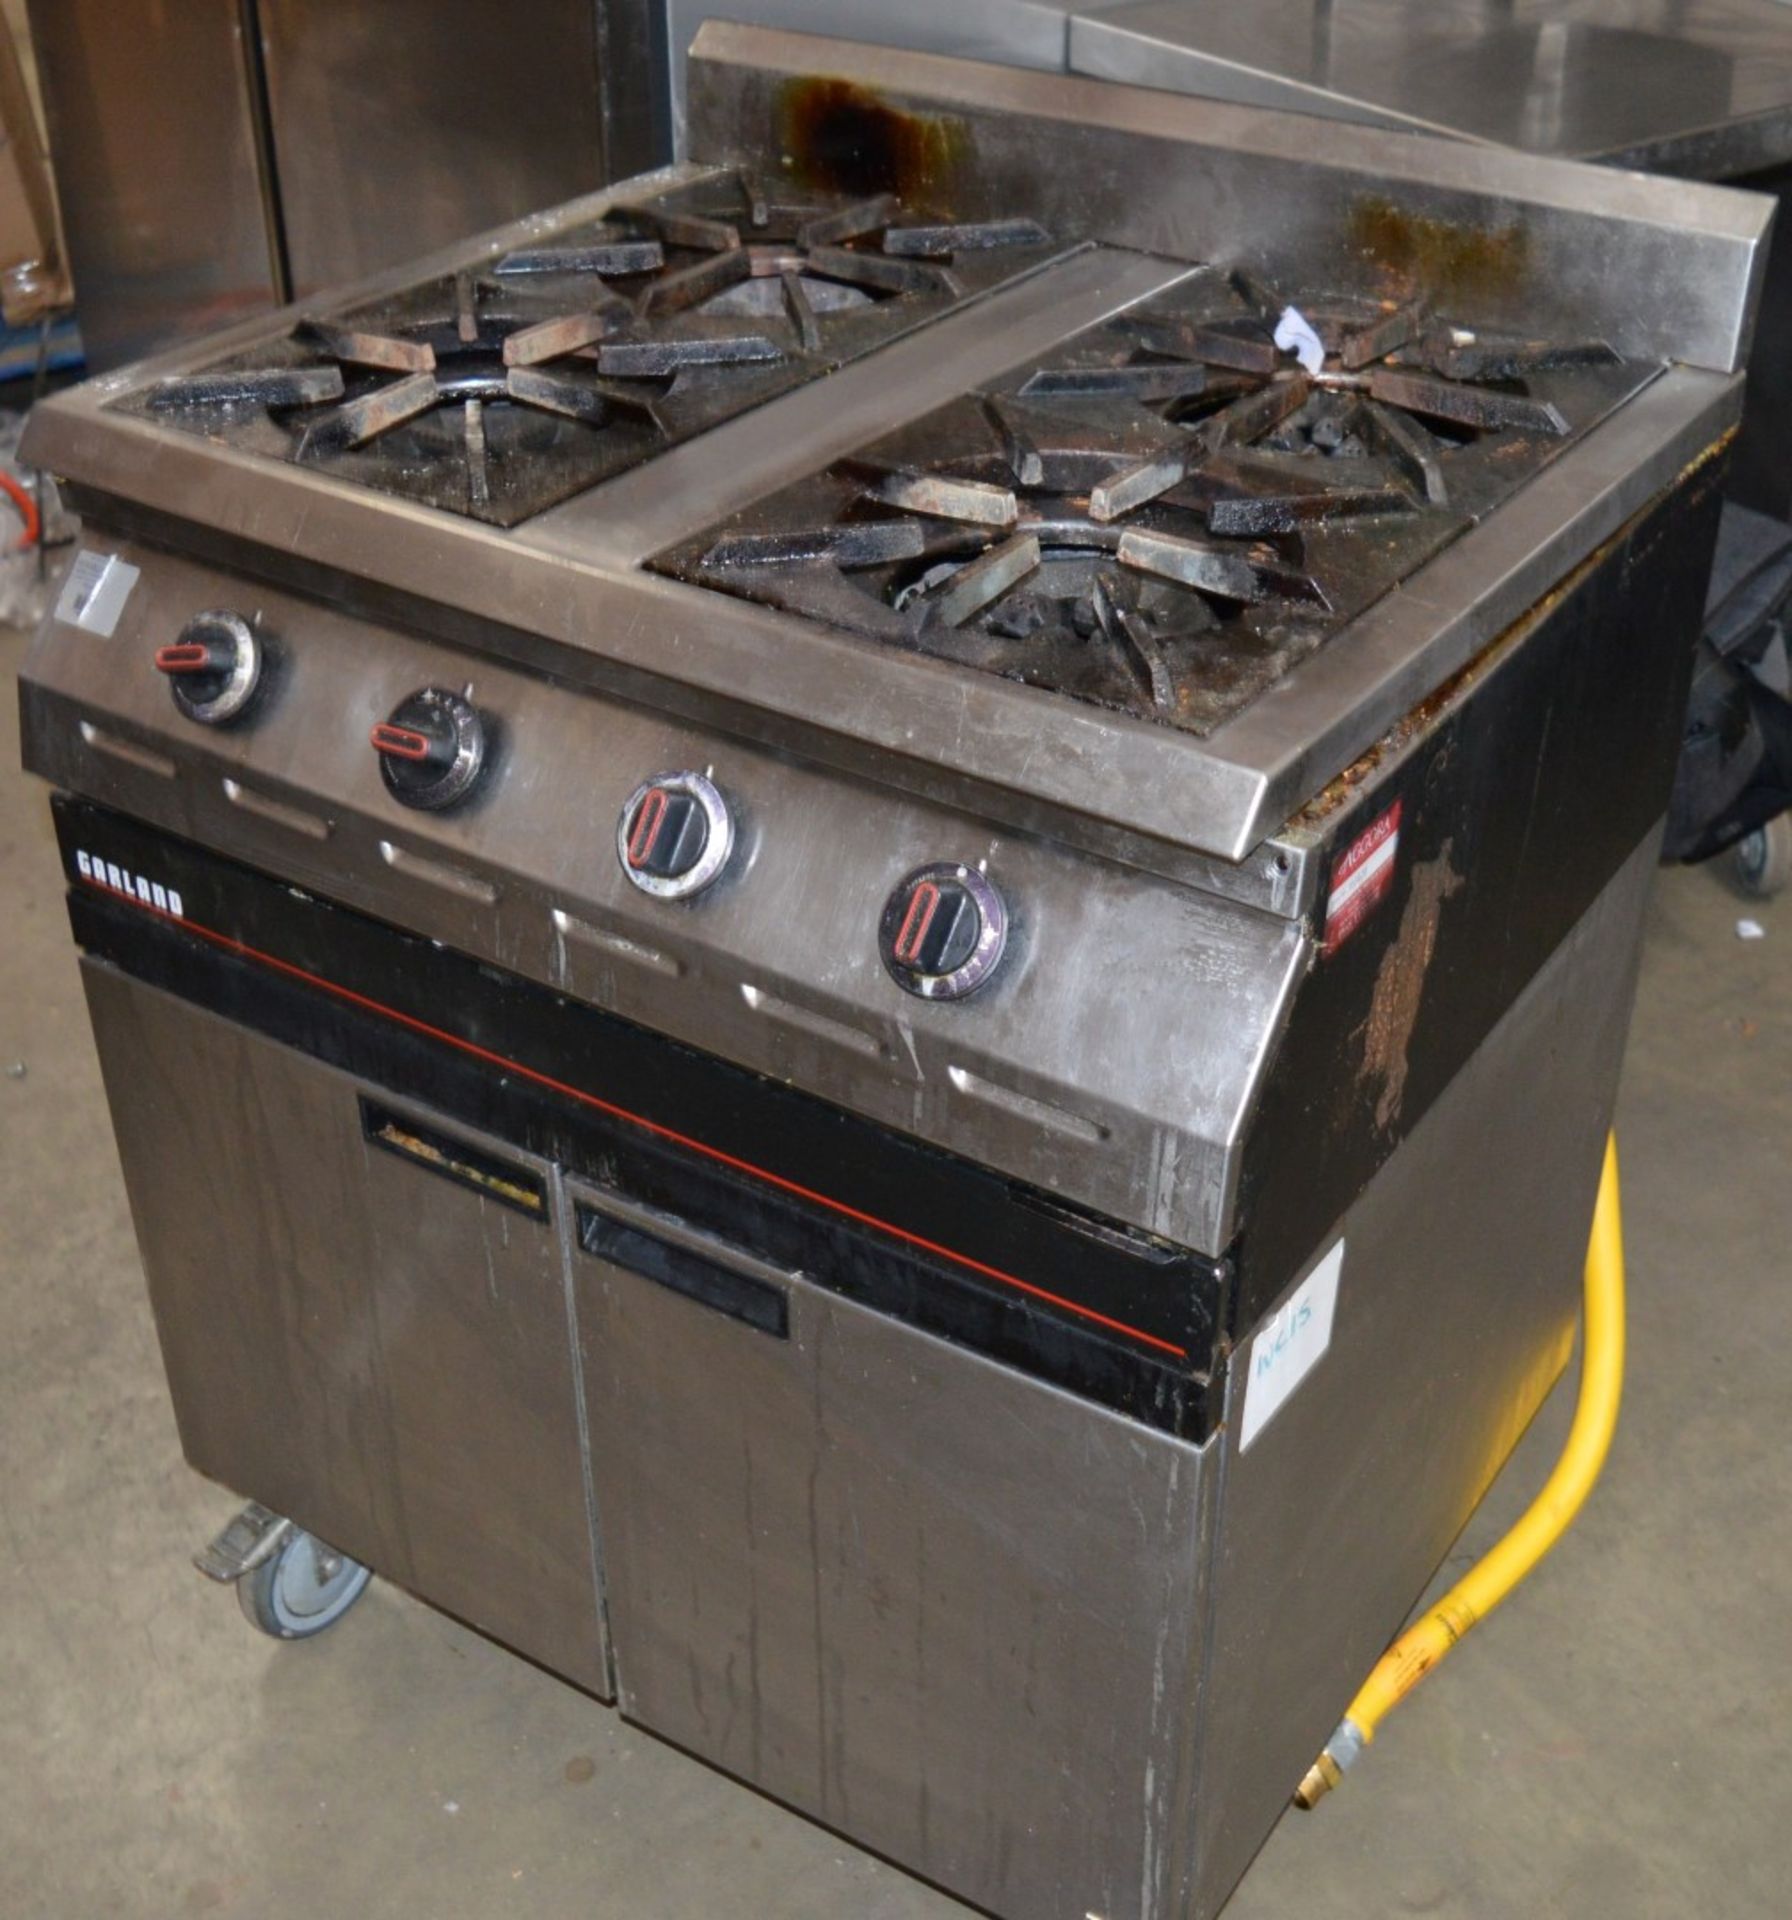 1 x Garland Commercial Range Cooker - Four Gas Burners - On Castors - Suitable For Professional - Image 5 of 8